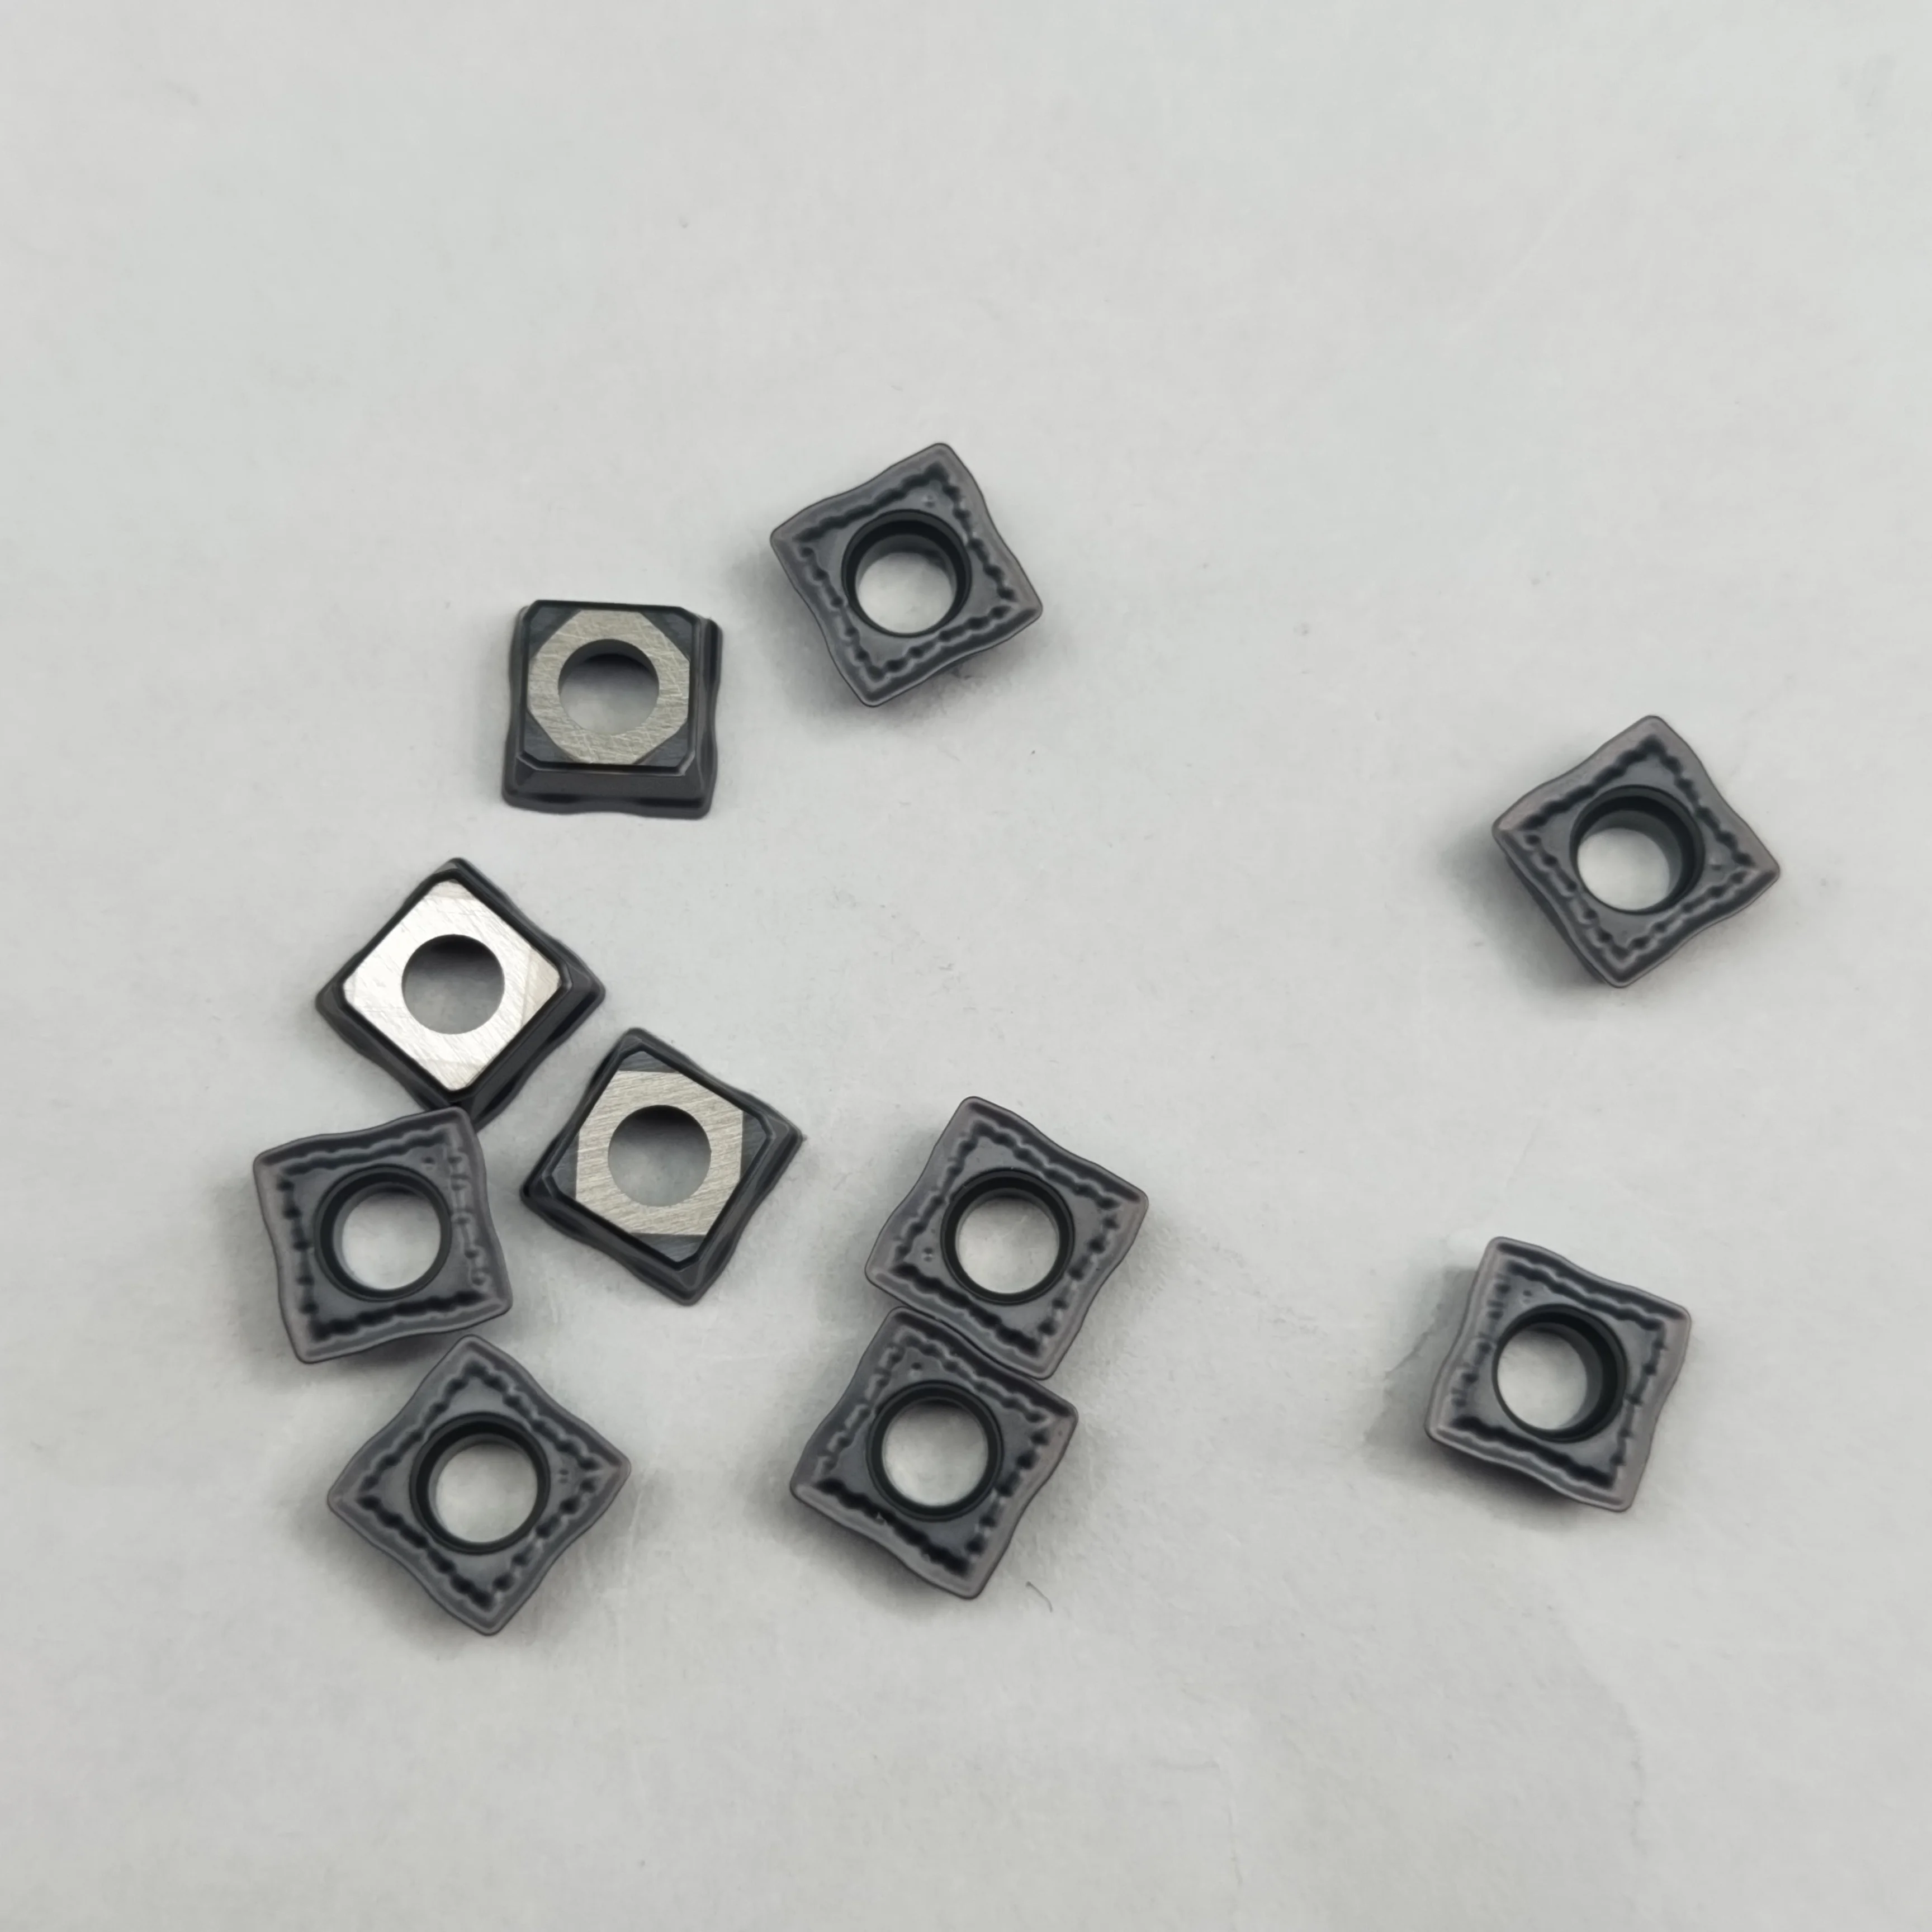 

10pcs SOMT060204 SOMT 060204 U Drill Carbide Inserts Turning Tools Indexable Cutter CNC Lathe Blade for Mould steel